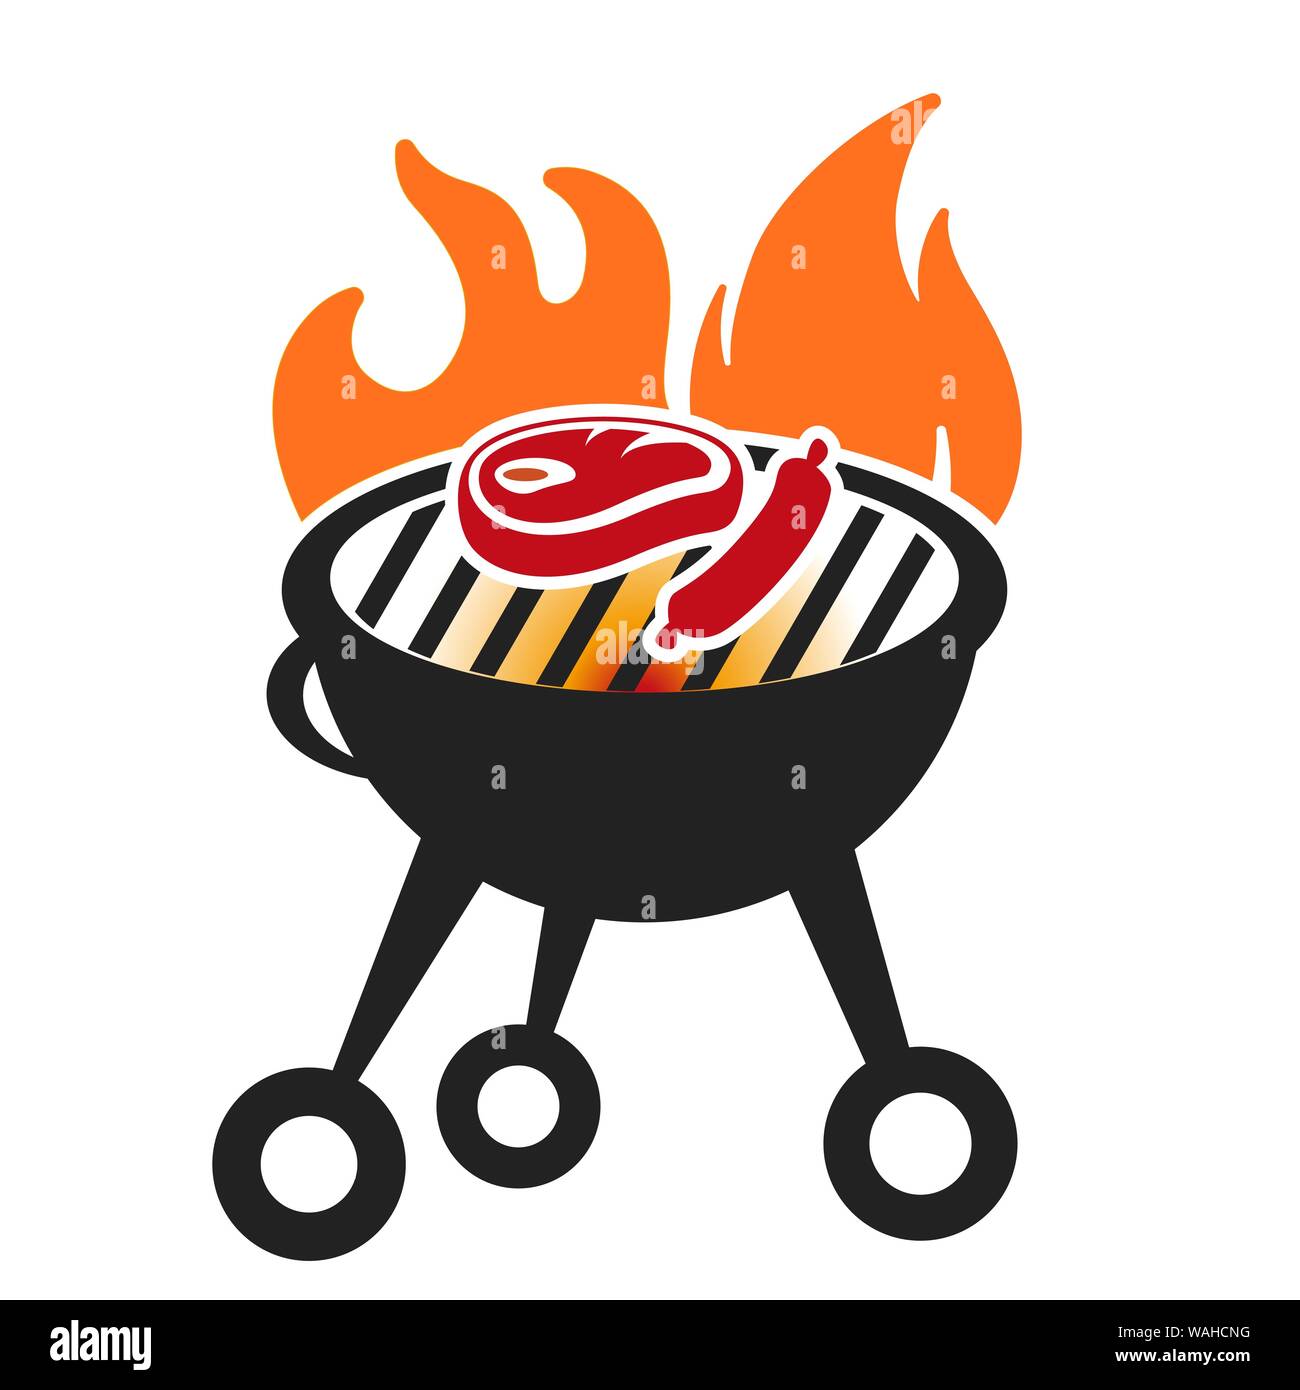 https://c8.alamy.com/comp/WAHCNG/vector-illustration-barbecue-icon-with-meat-and-fire-simple-and-flat-WAHCNG.jpg